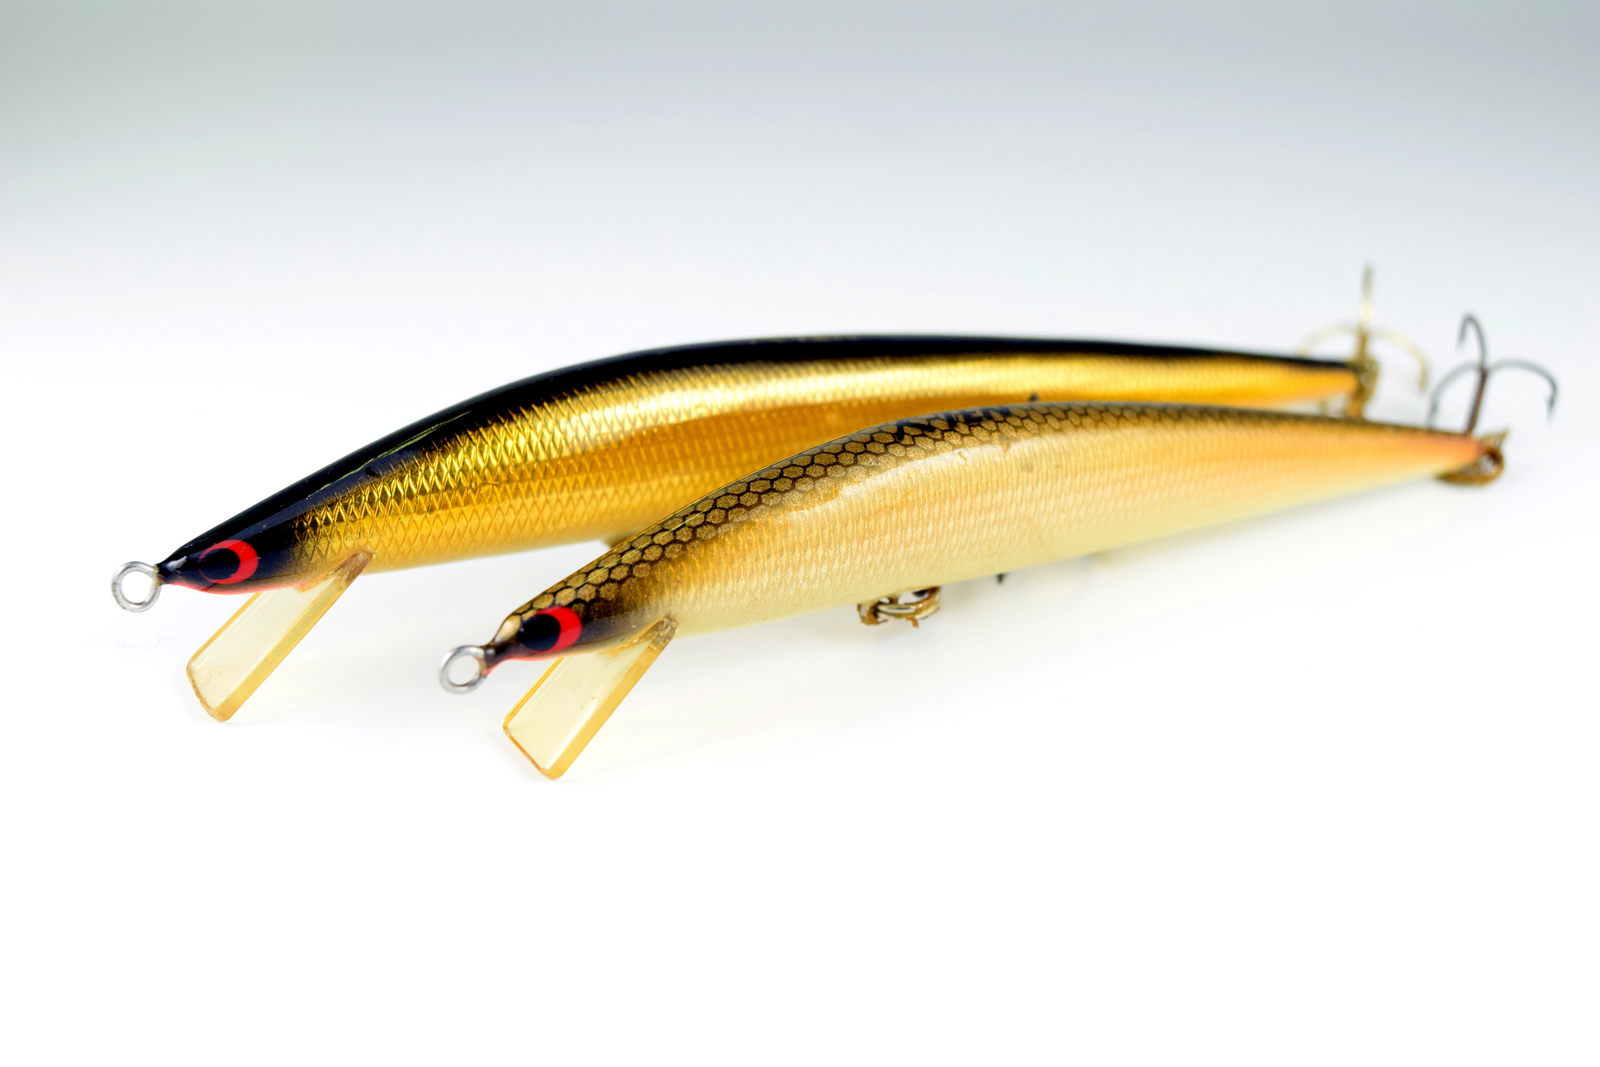 How to Use Fishing Lures: Choosing, Attaching, and Casting